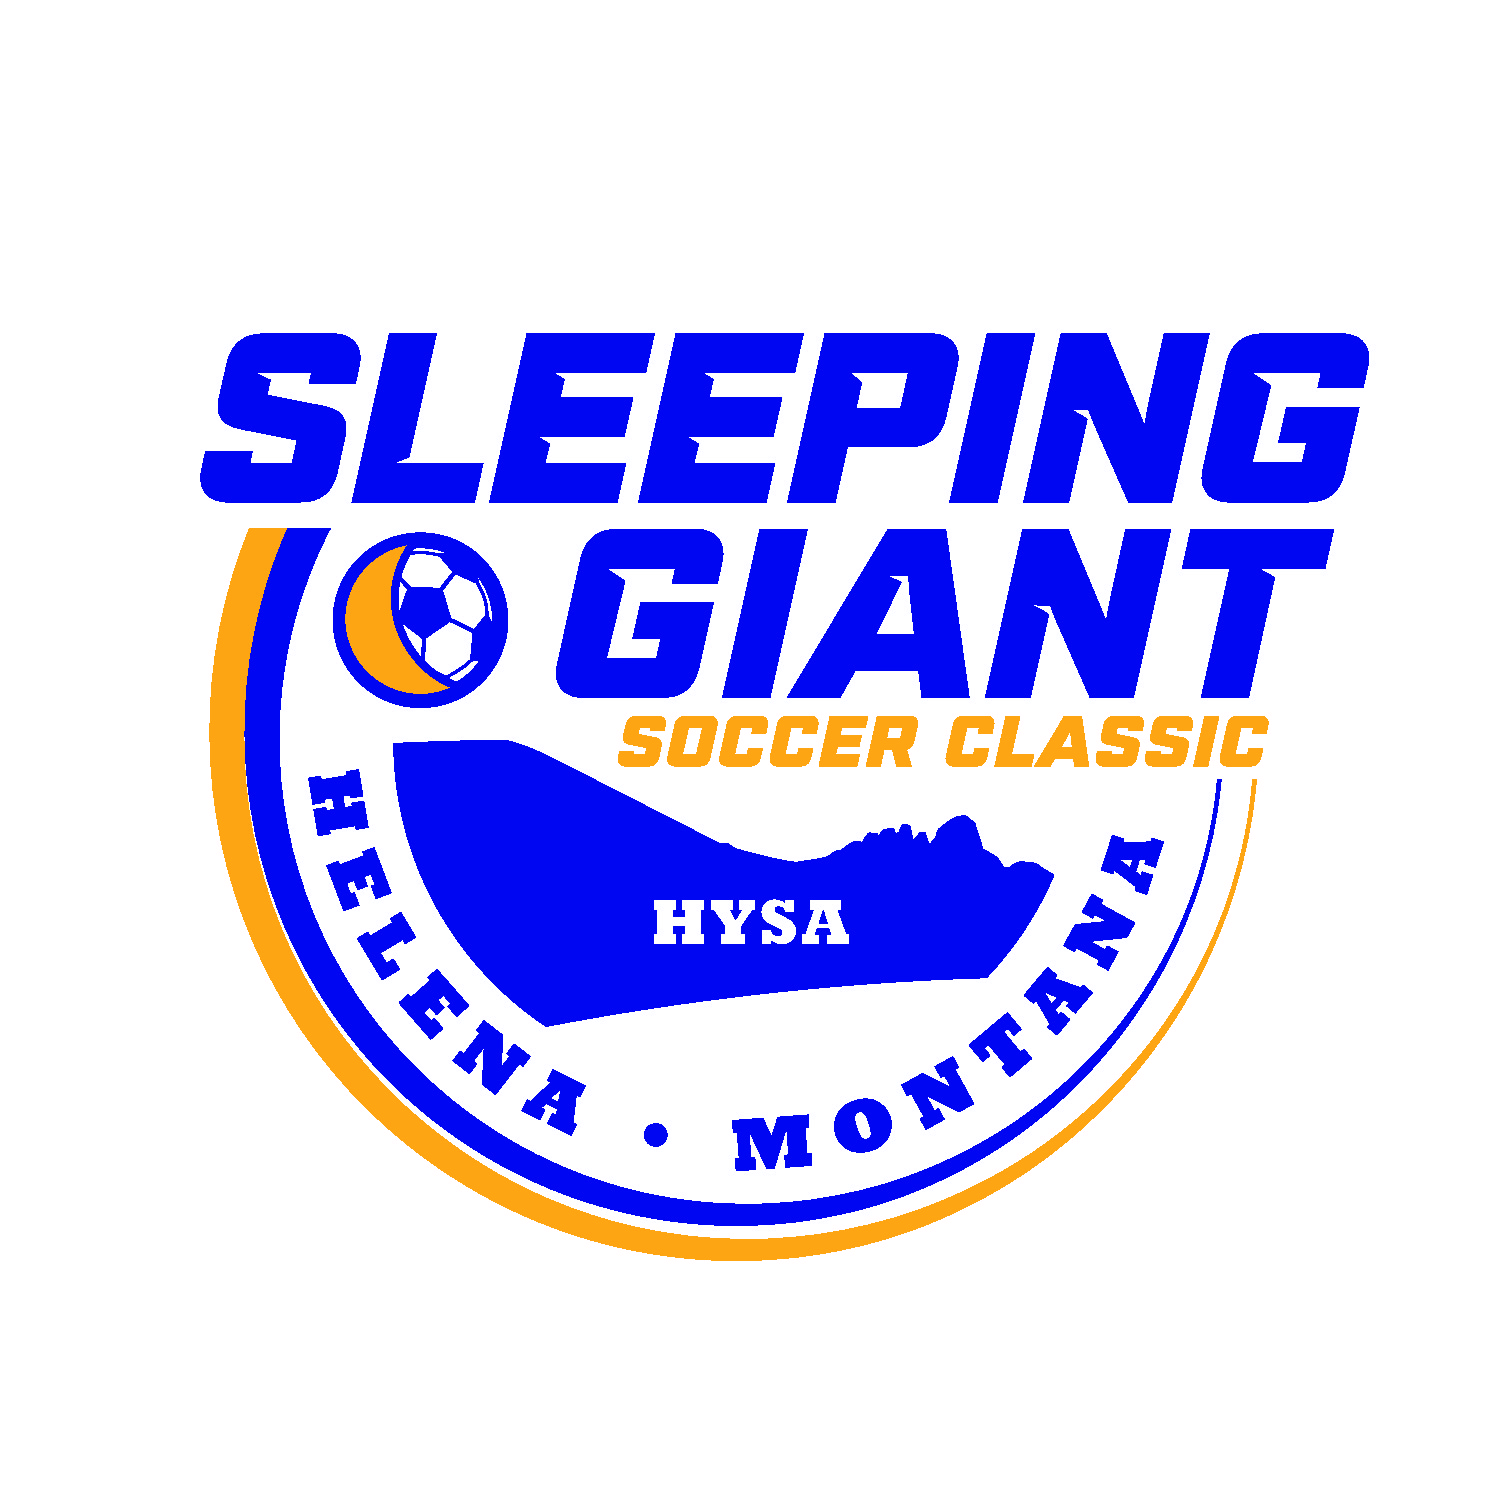 Sleeping Giant 4th Annual 2016 Schedule & Fields Information